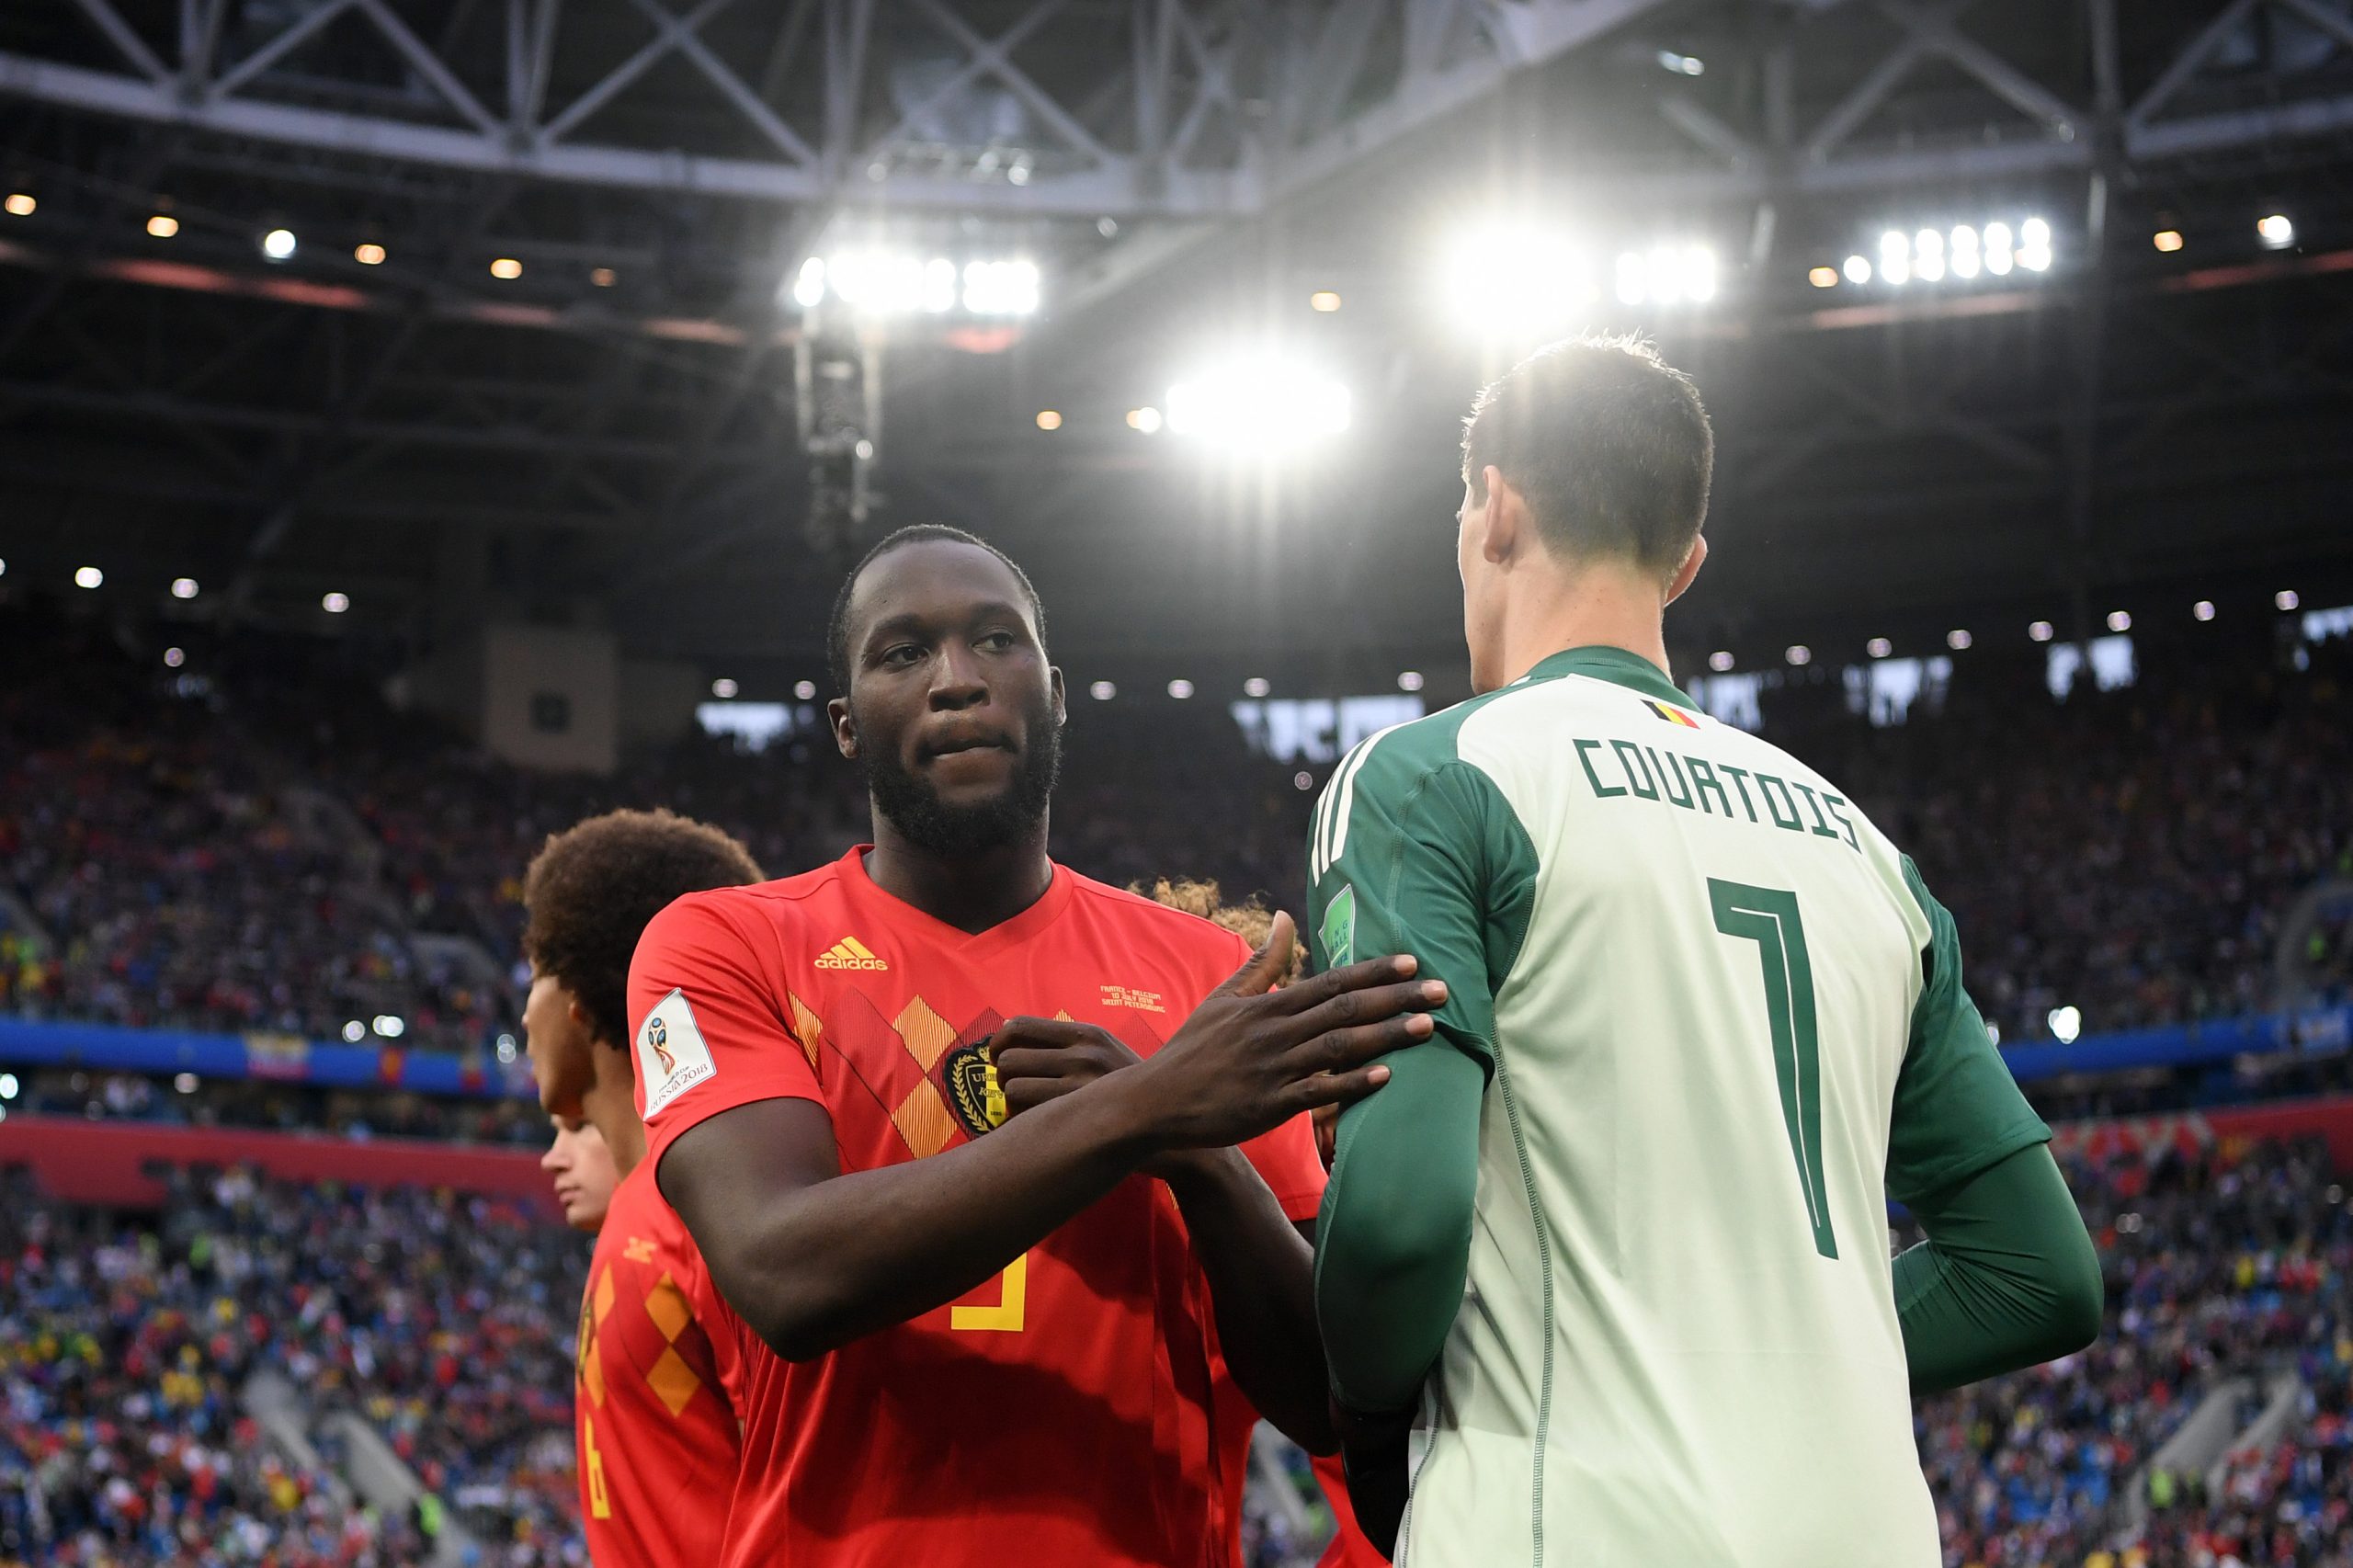 Romelu Lukaku backed to succeed at Chelsea by Thibaut Courtois. (Photo by Laurence Griffiths/Getty Images)